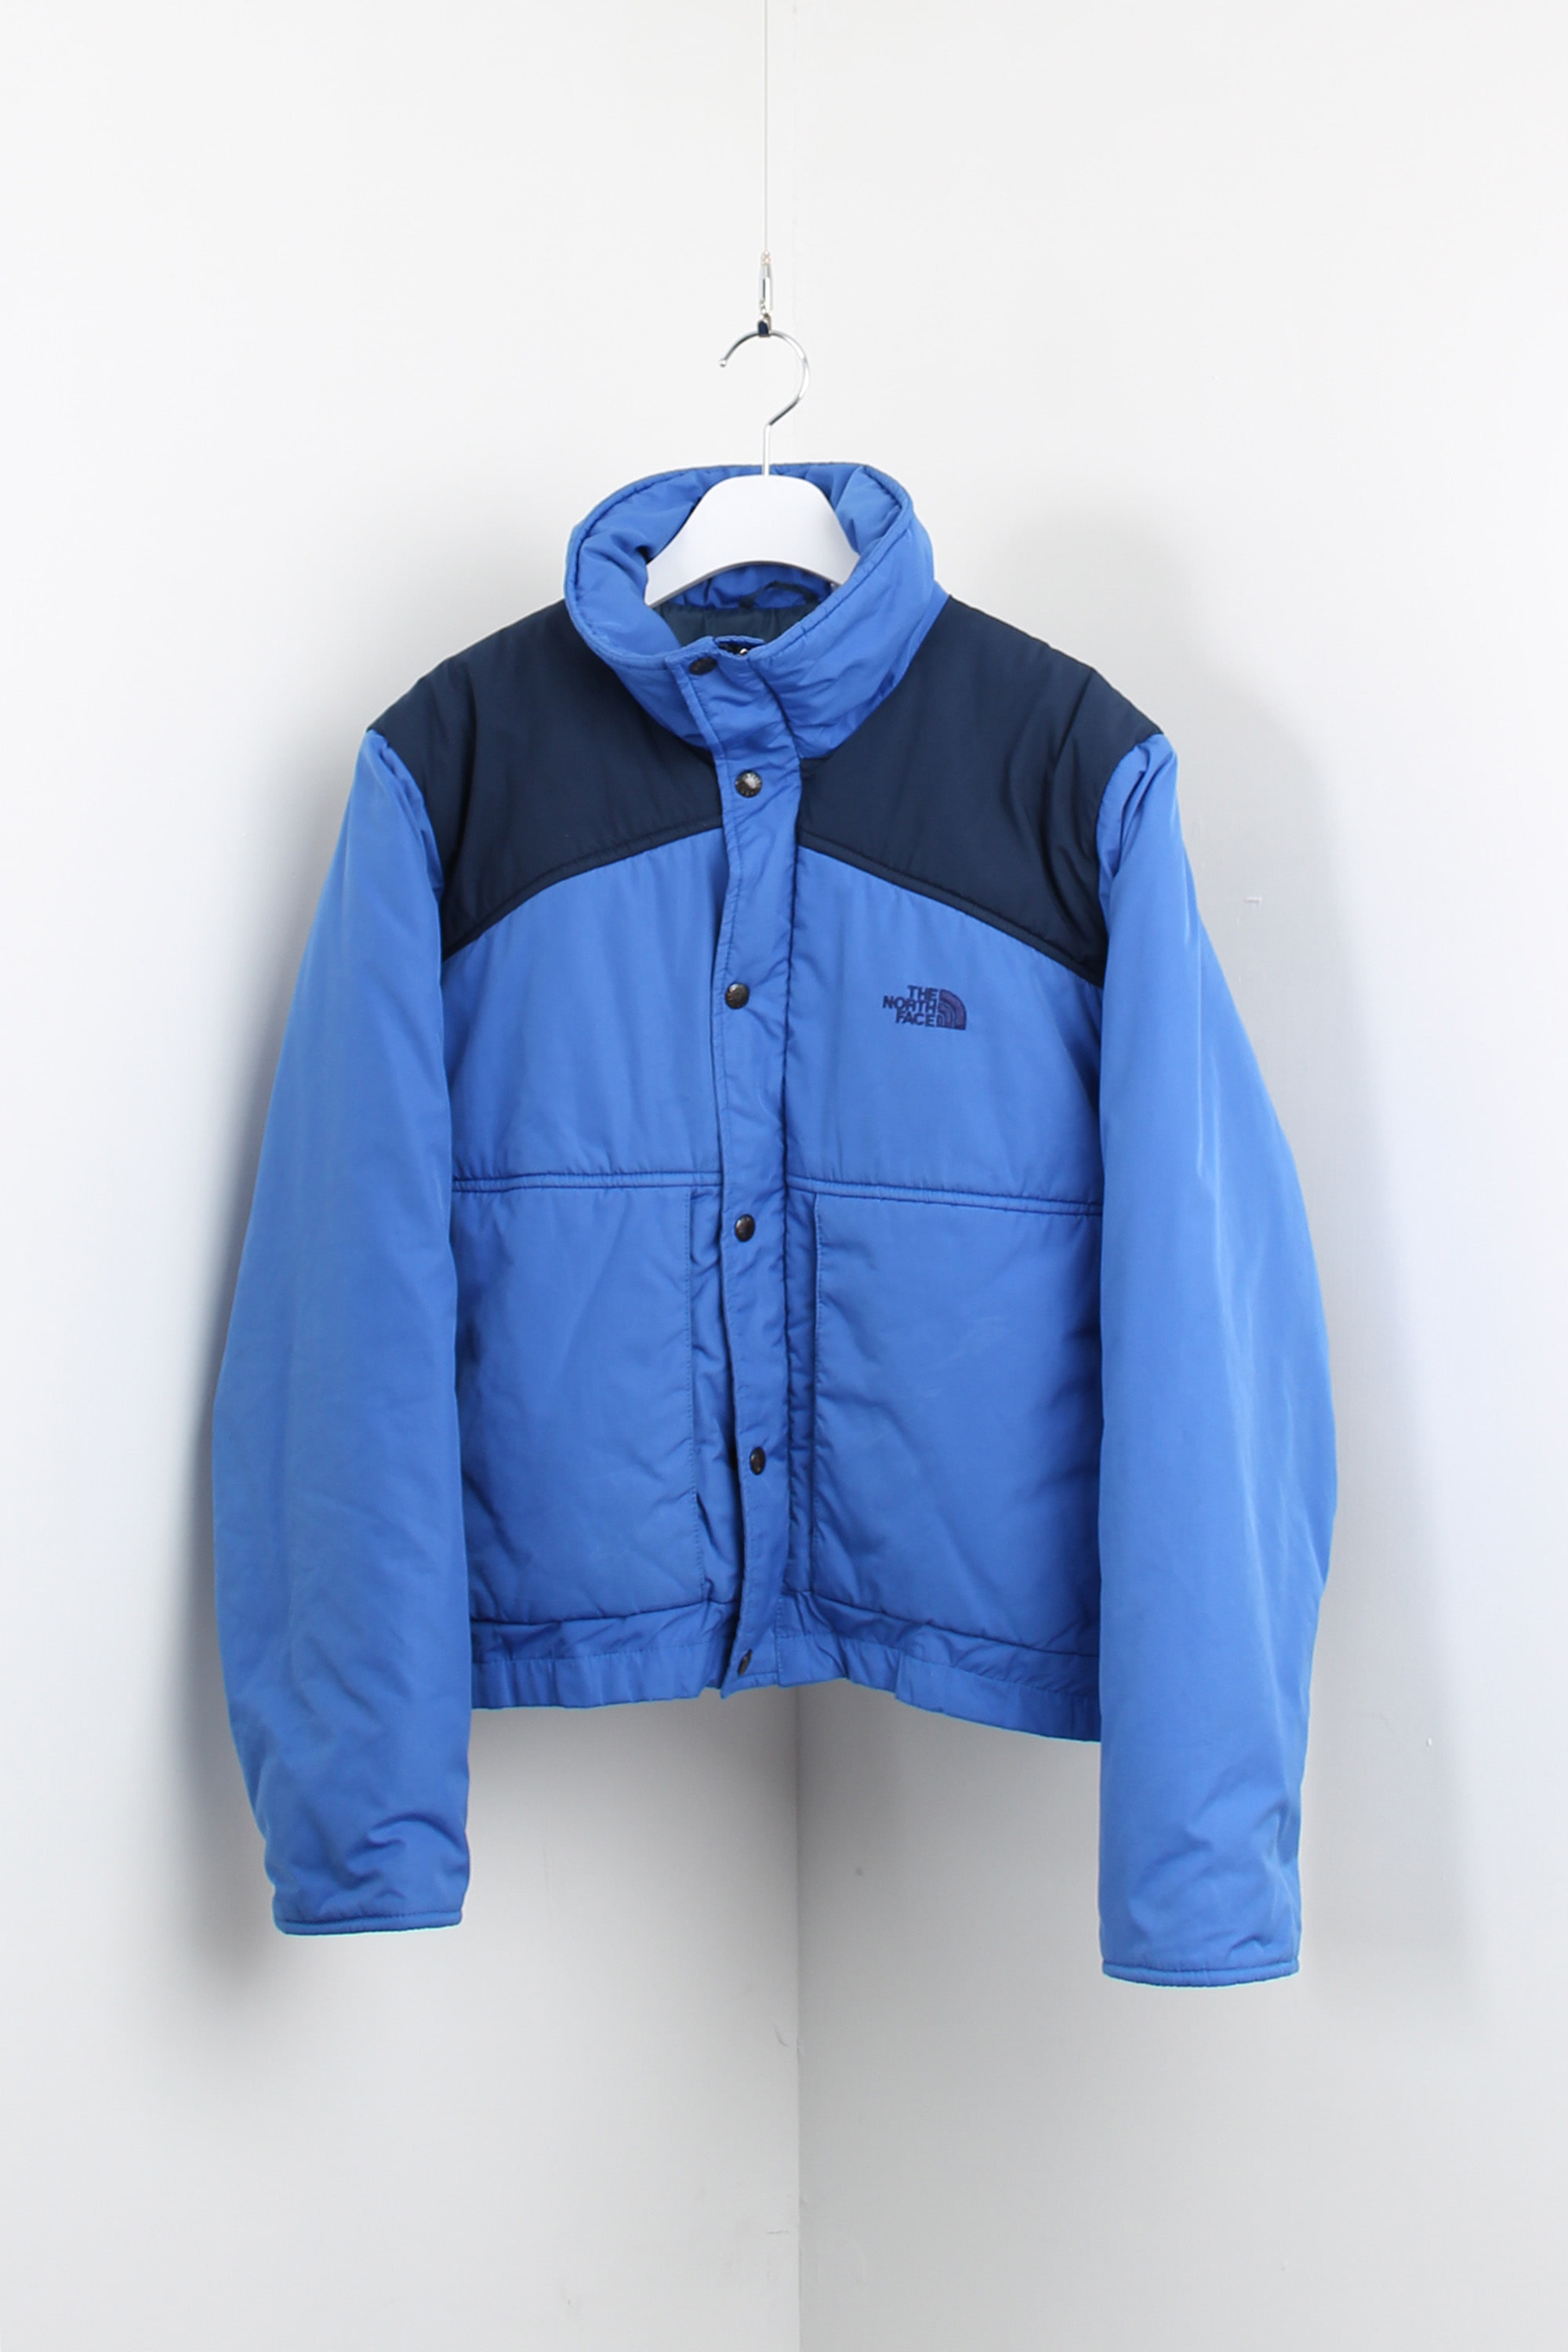 vintage north face THERMOLITE ® jacket